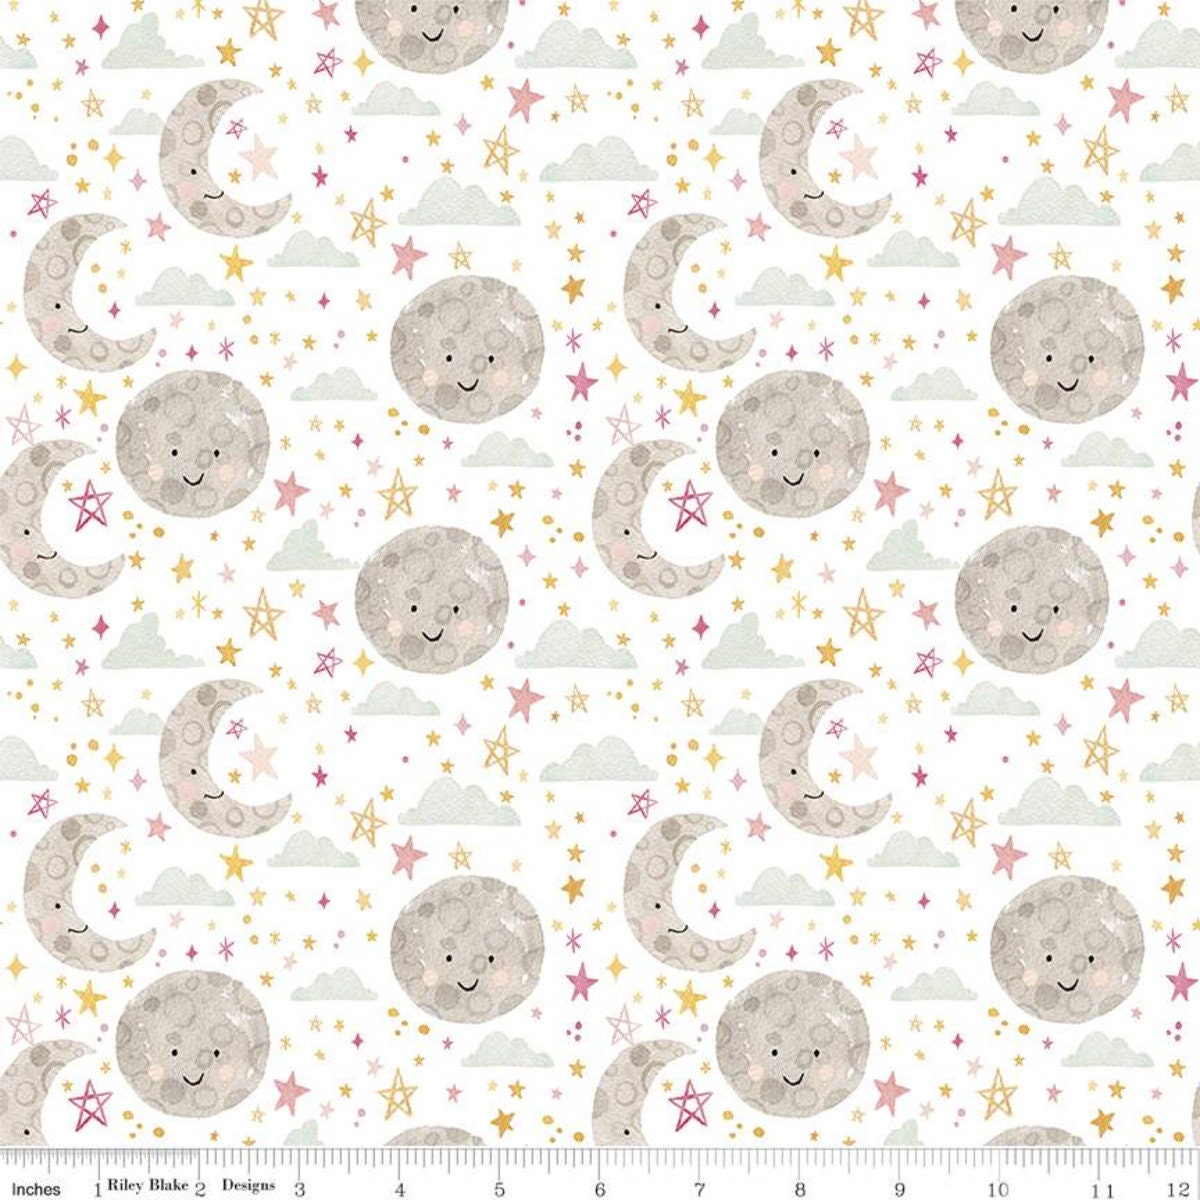 Mooon and crescent moon on white cotton flannel